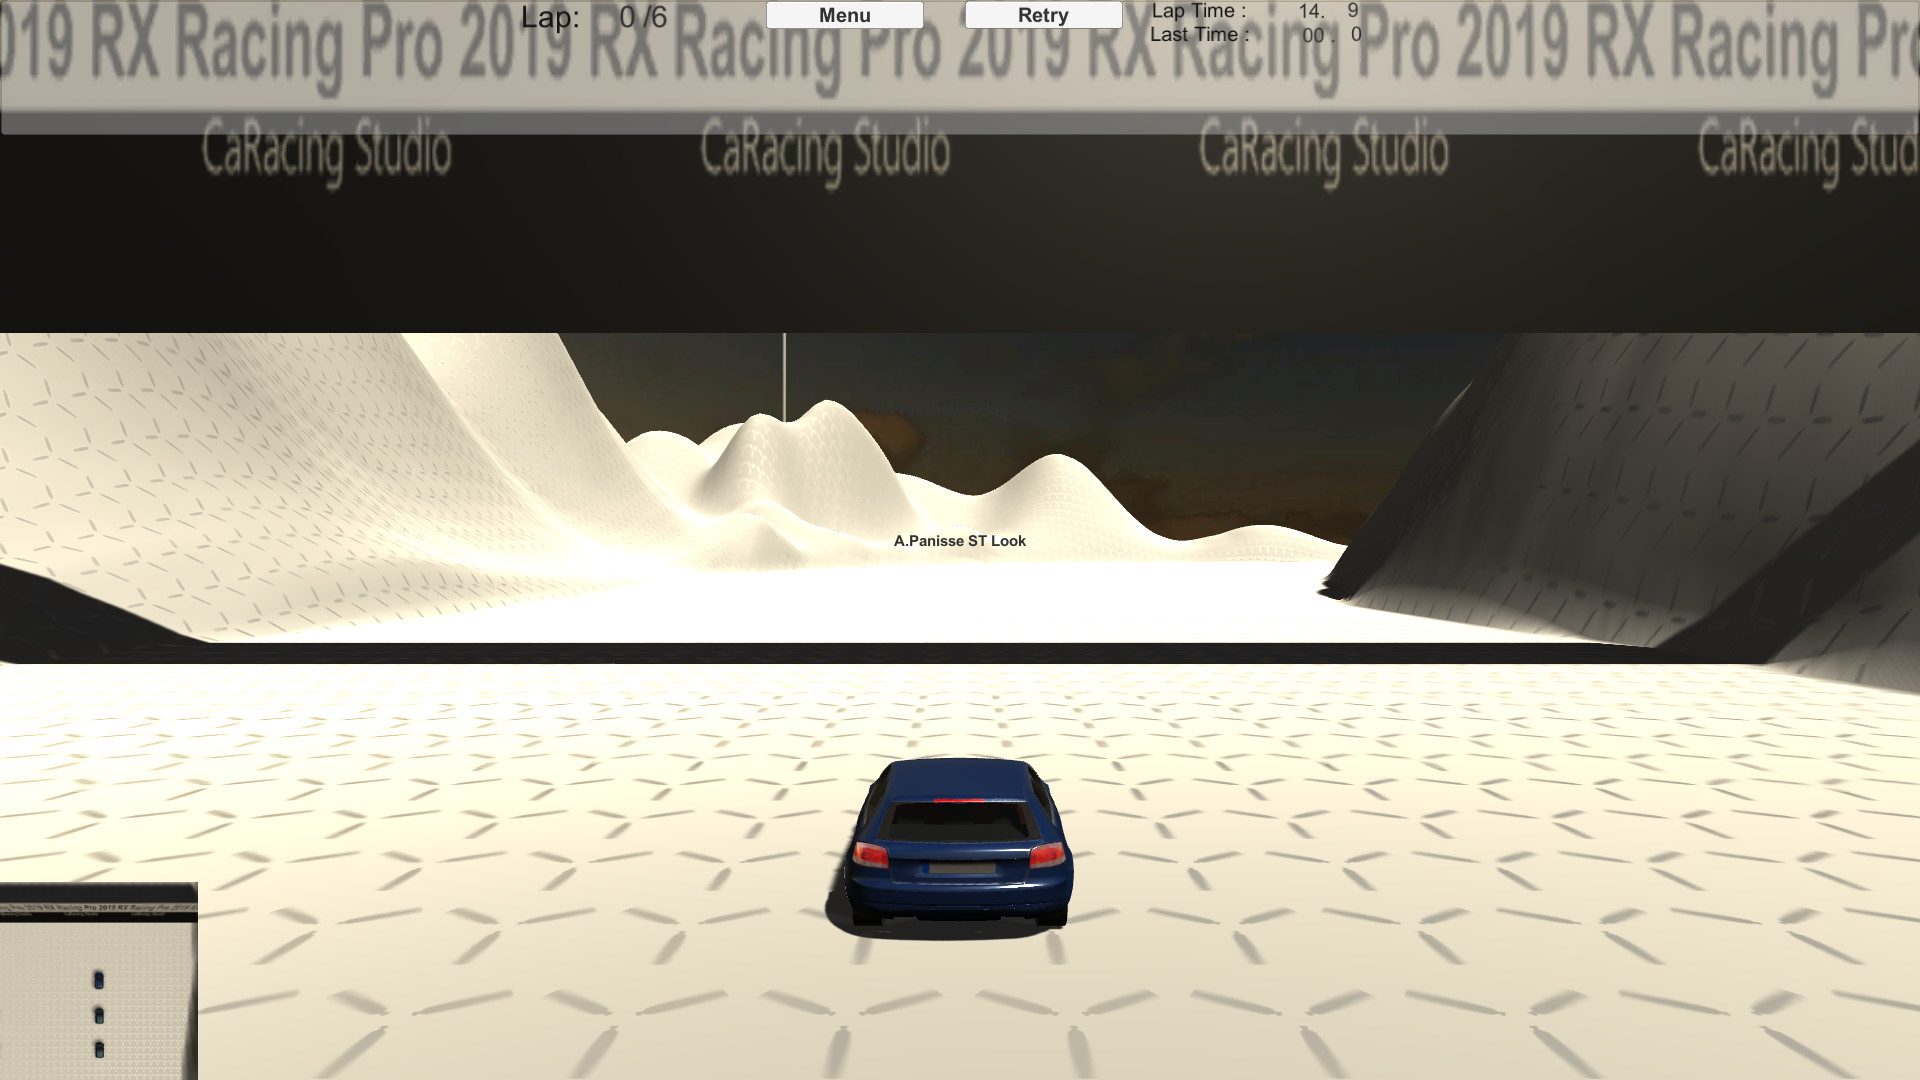 RX Racing 2019 Pro Free Download